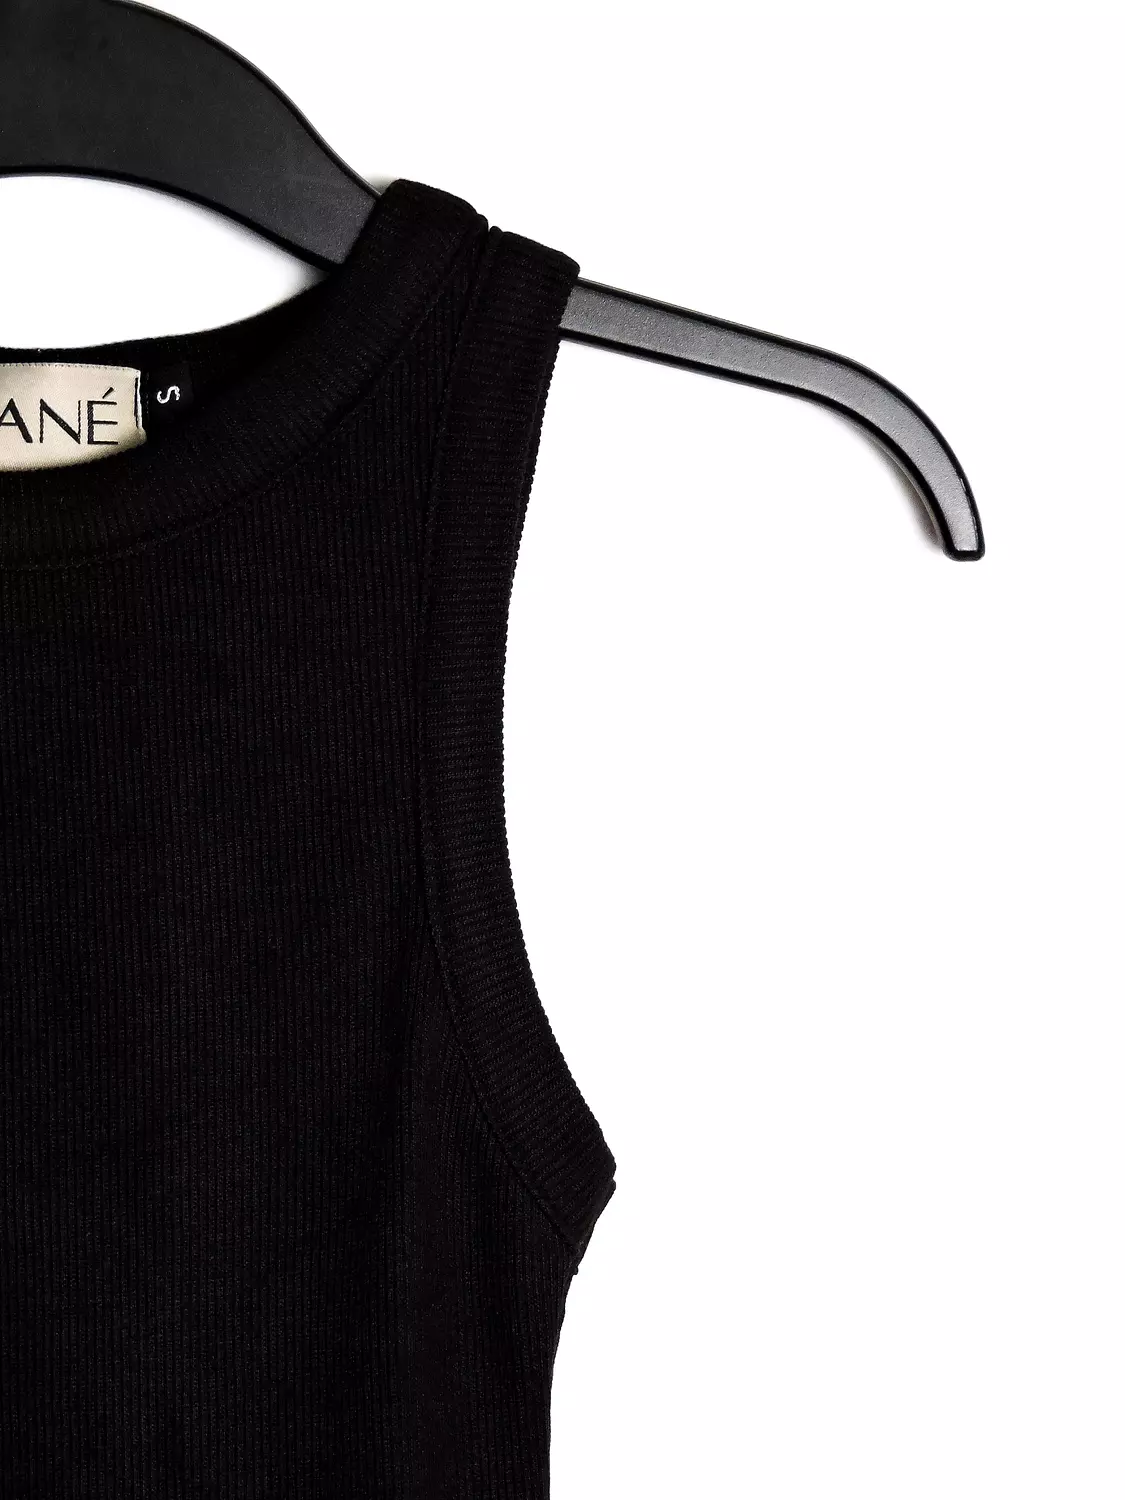 The Black Tank Top-2nd-img